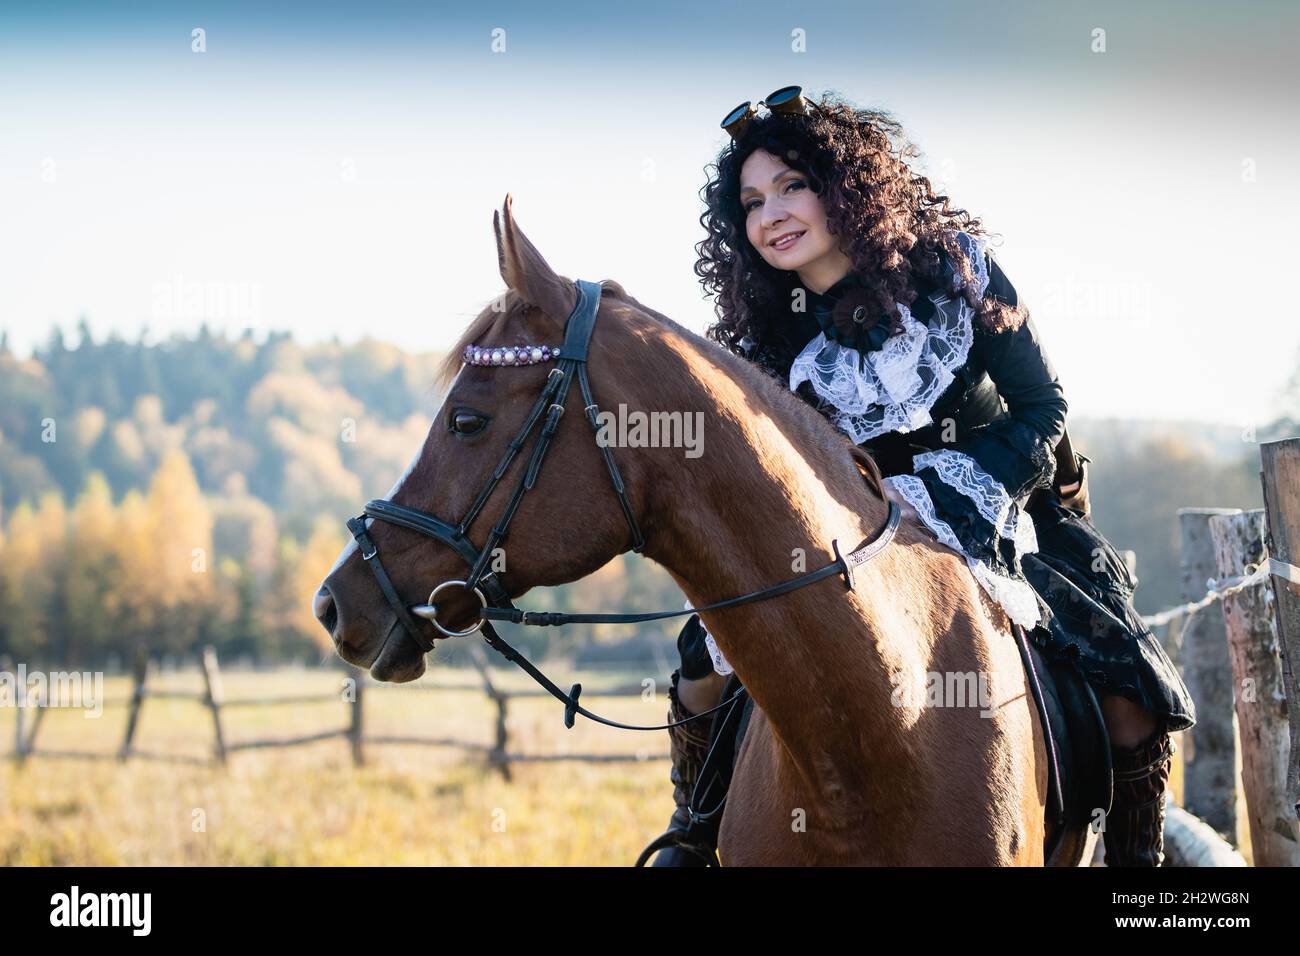 Portrait of a mature woman in a steampunk costume on a horse against the backdrop of an autumn landscape. Stock Photo